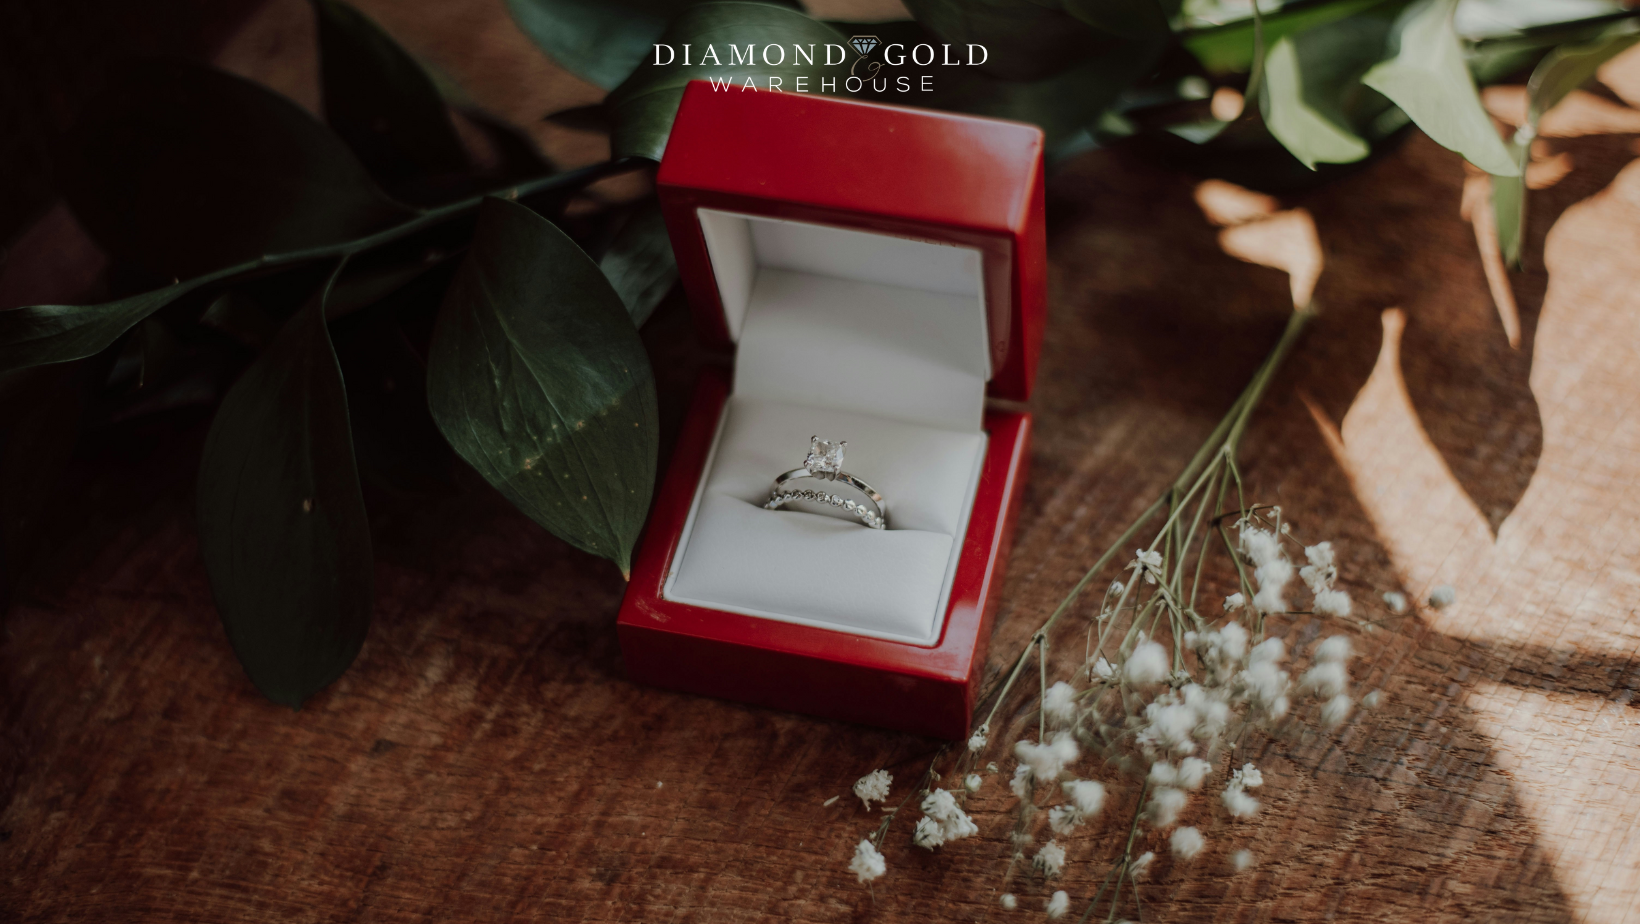 Things to Know Before Engagement Ring Shopping